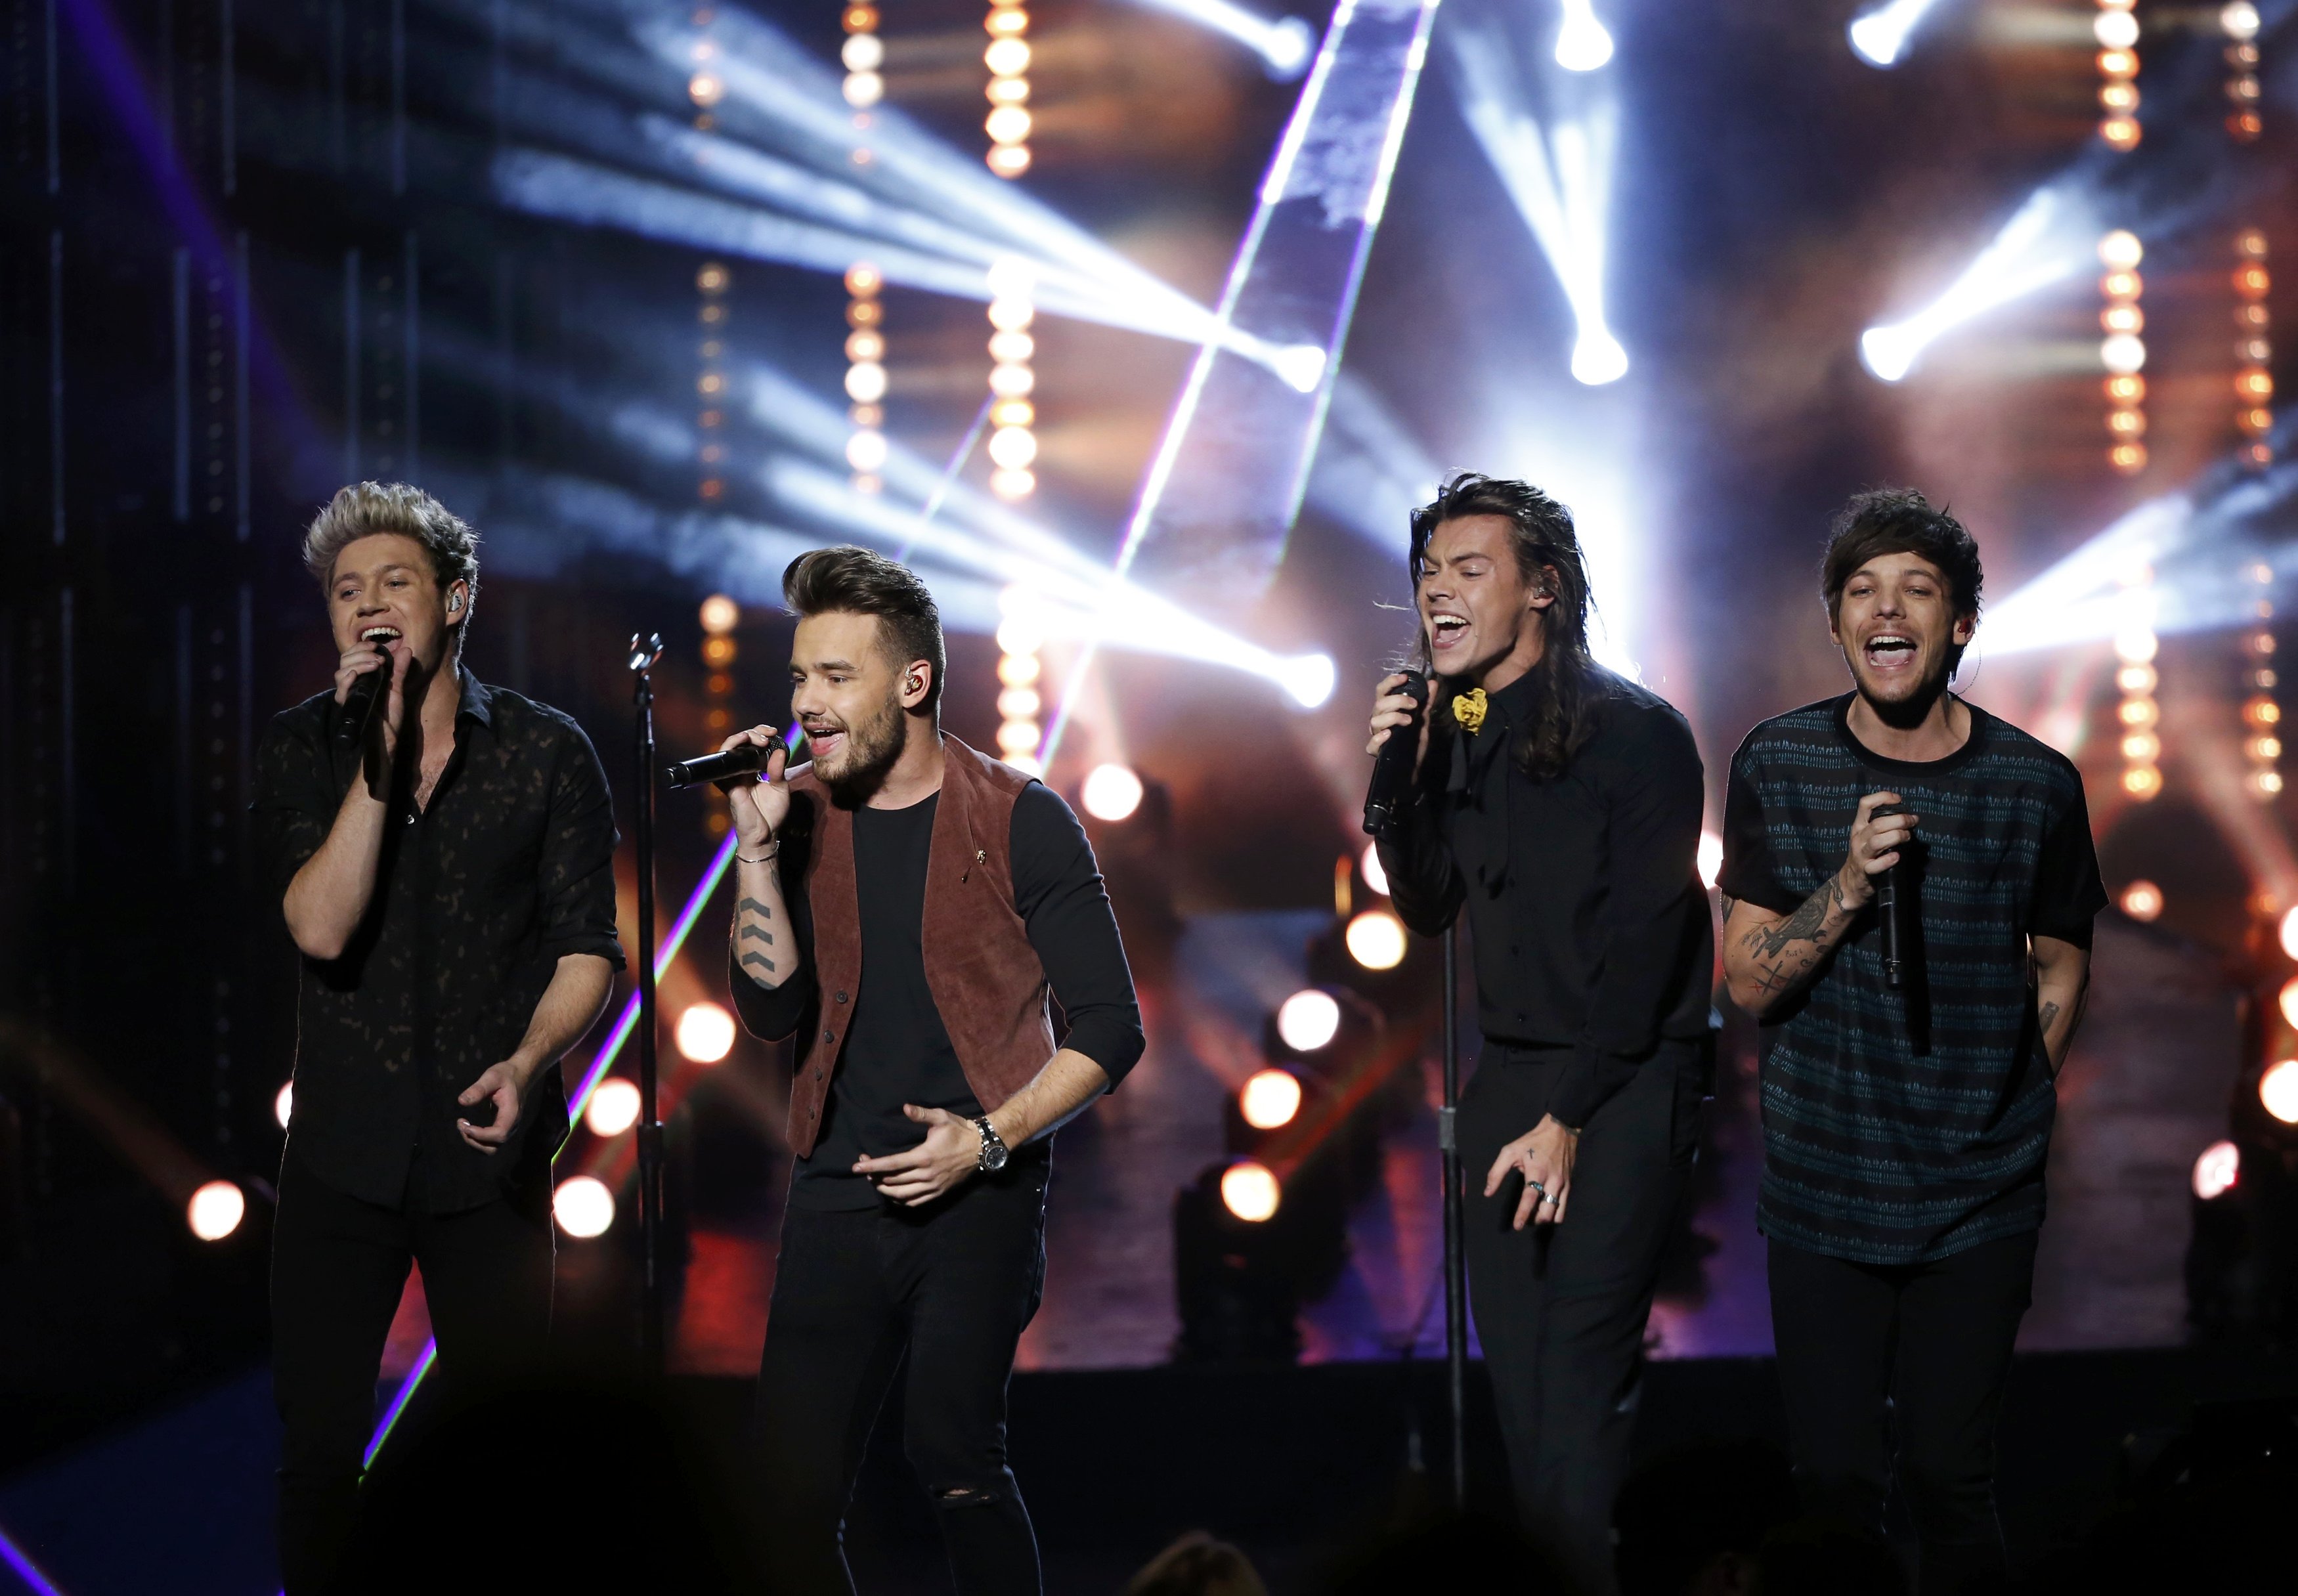 One Direction, The Weeknd early winners at American Music Awards